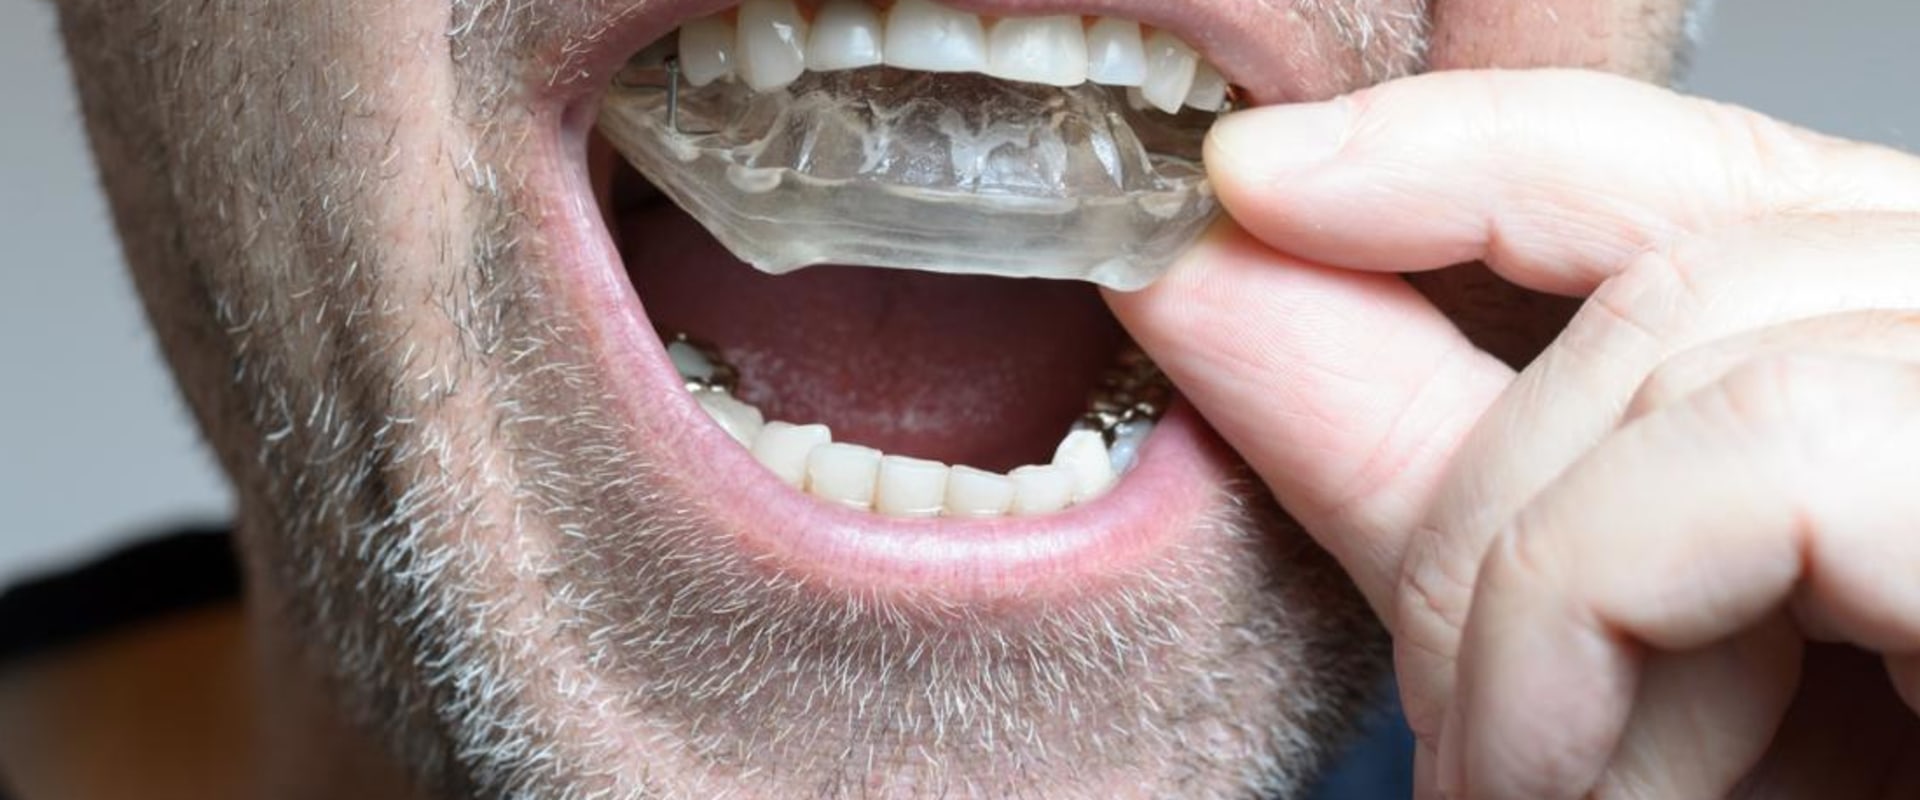 Do I Need to Have My Bite Checked Before Seeing a UK Orthodontist?